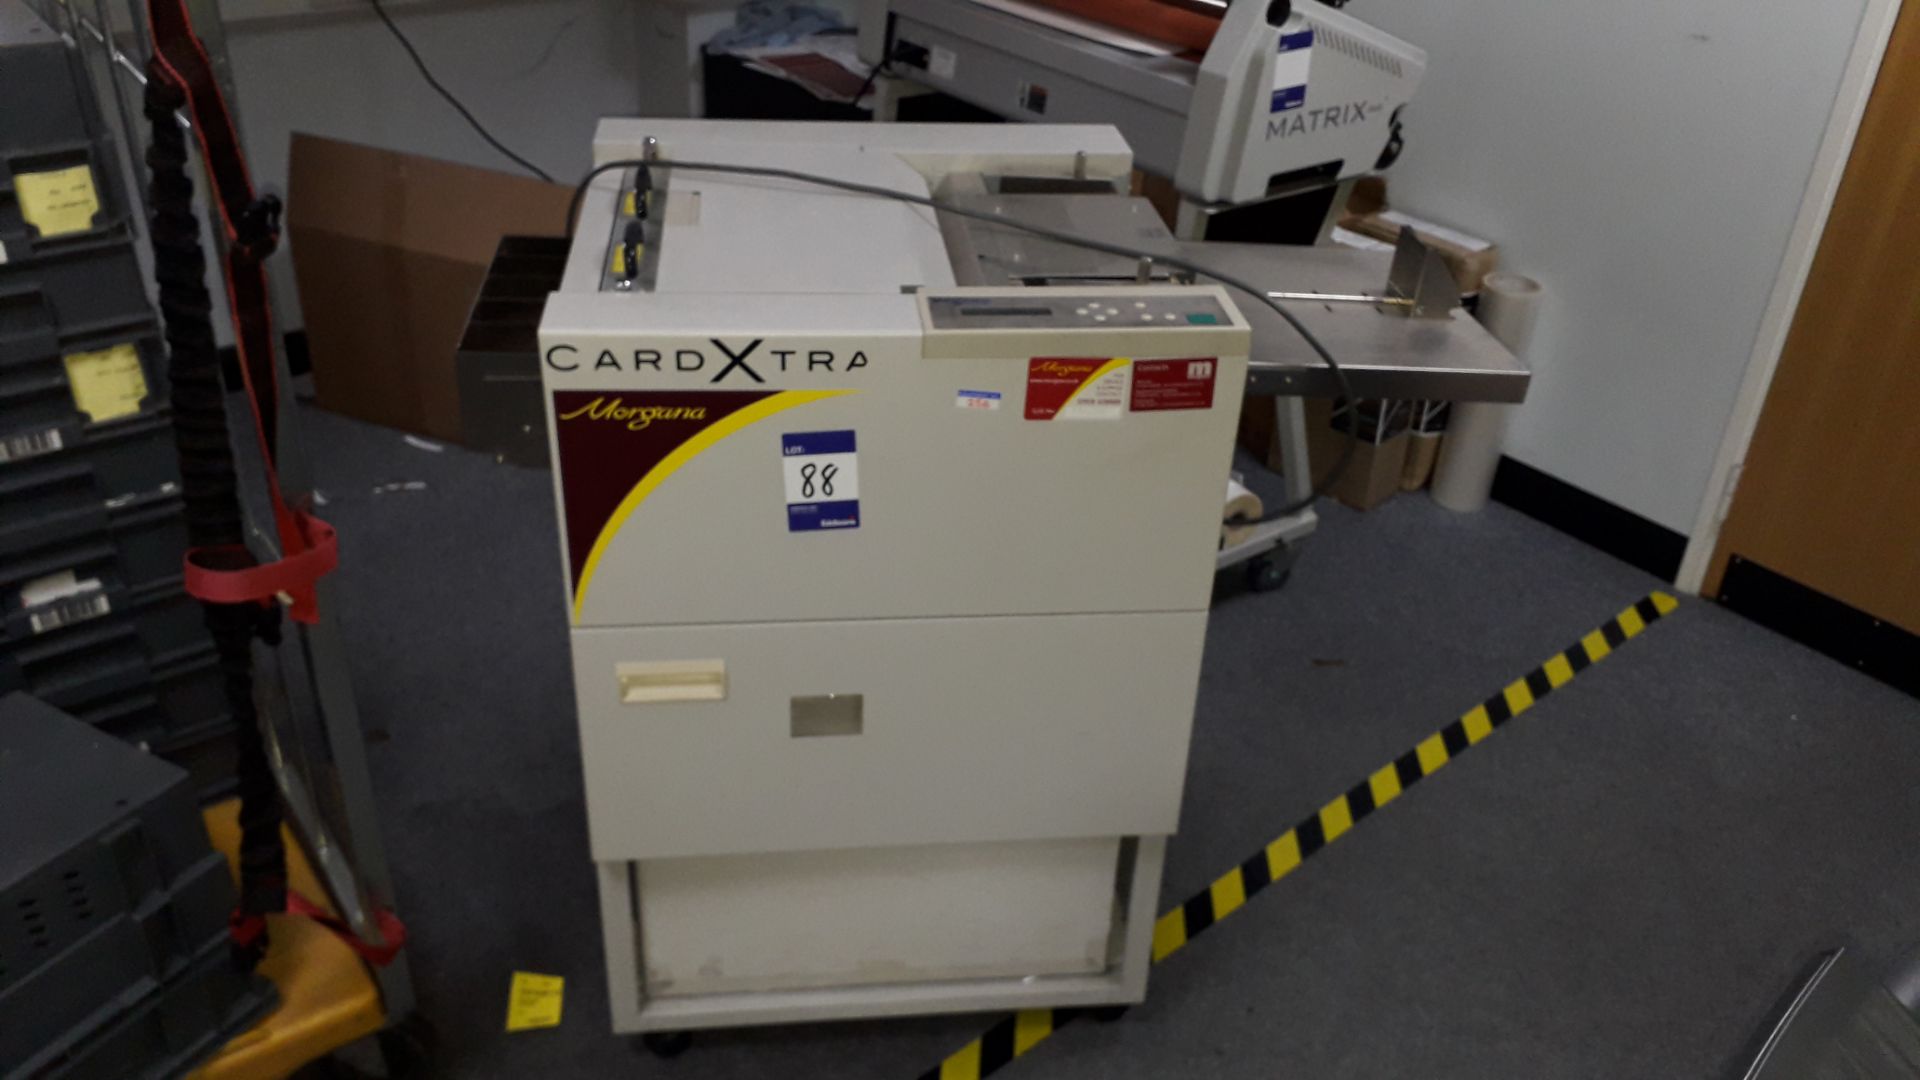 Morgana Card Xtra CT620 EXA Auto Cutter Serial Number 13638